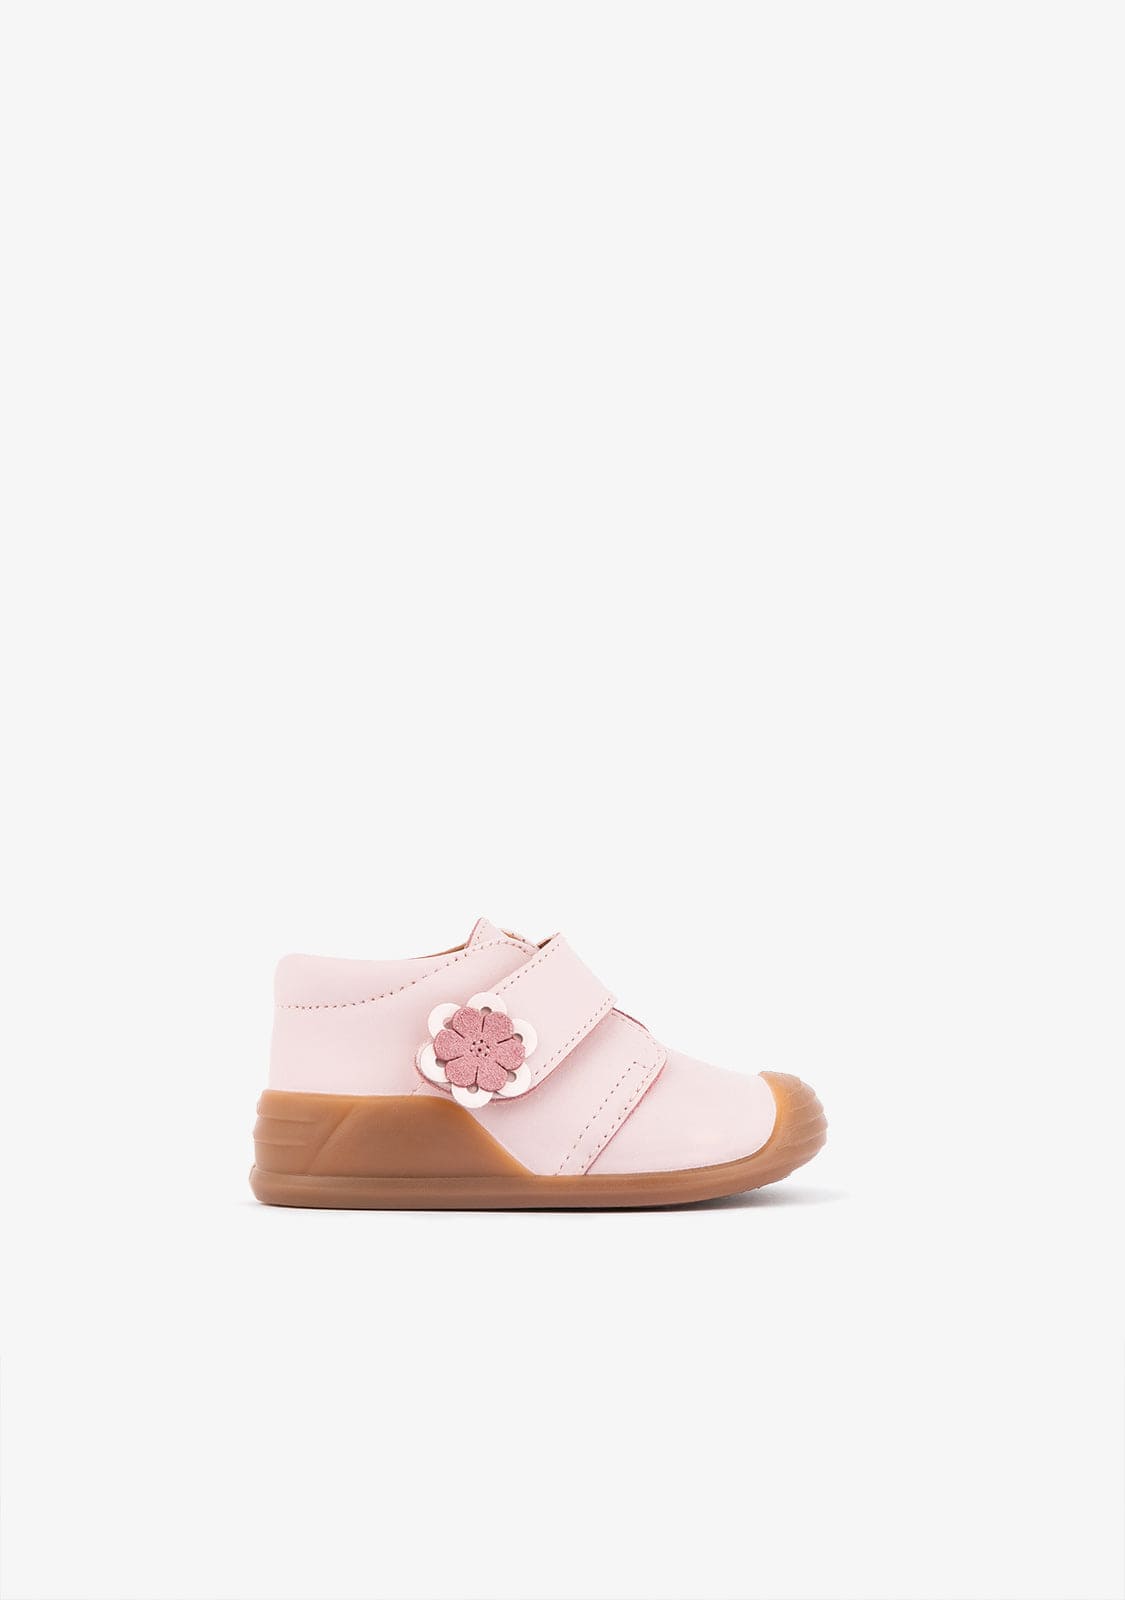 CONGUITOS Shoes Baby's Pink First Steps Ankle Boots Flower